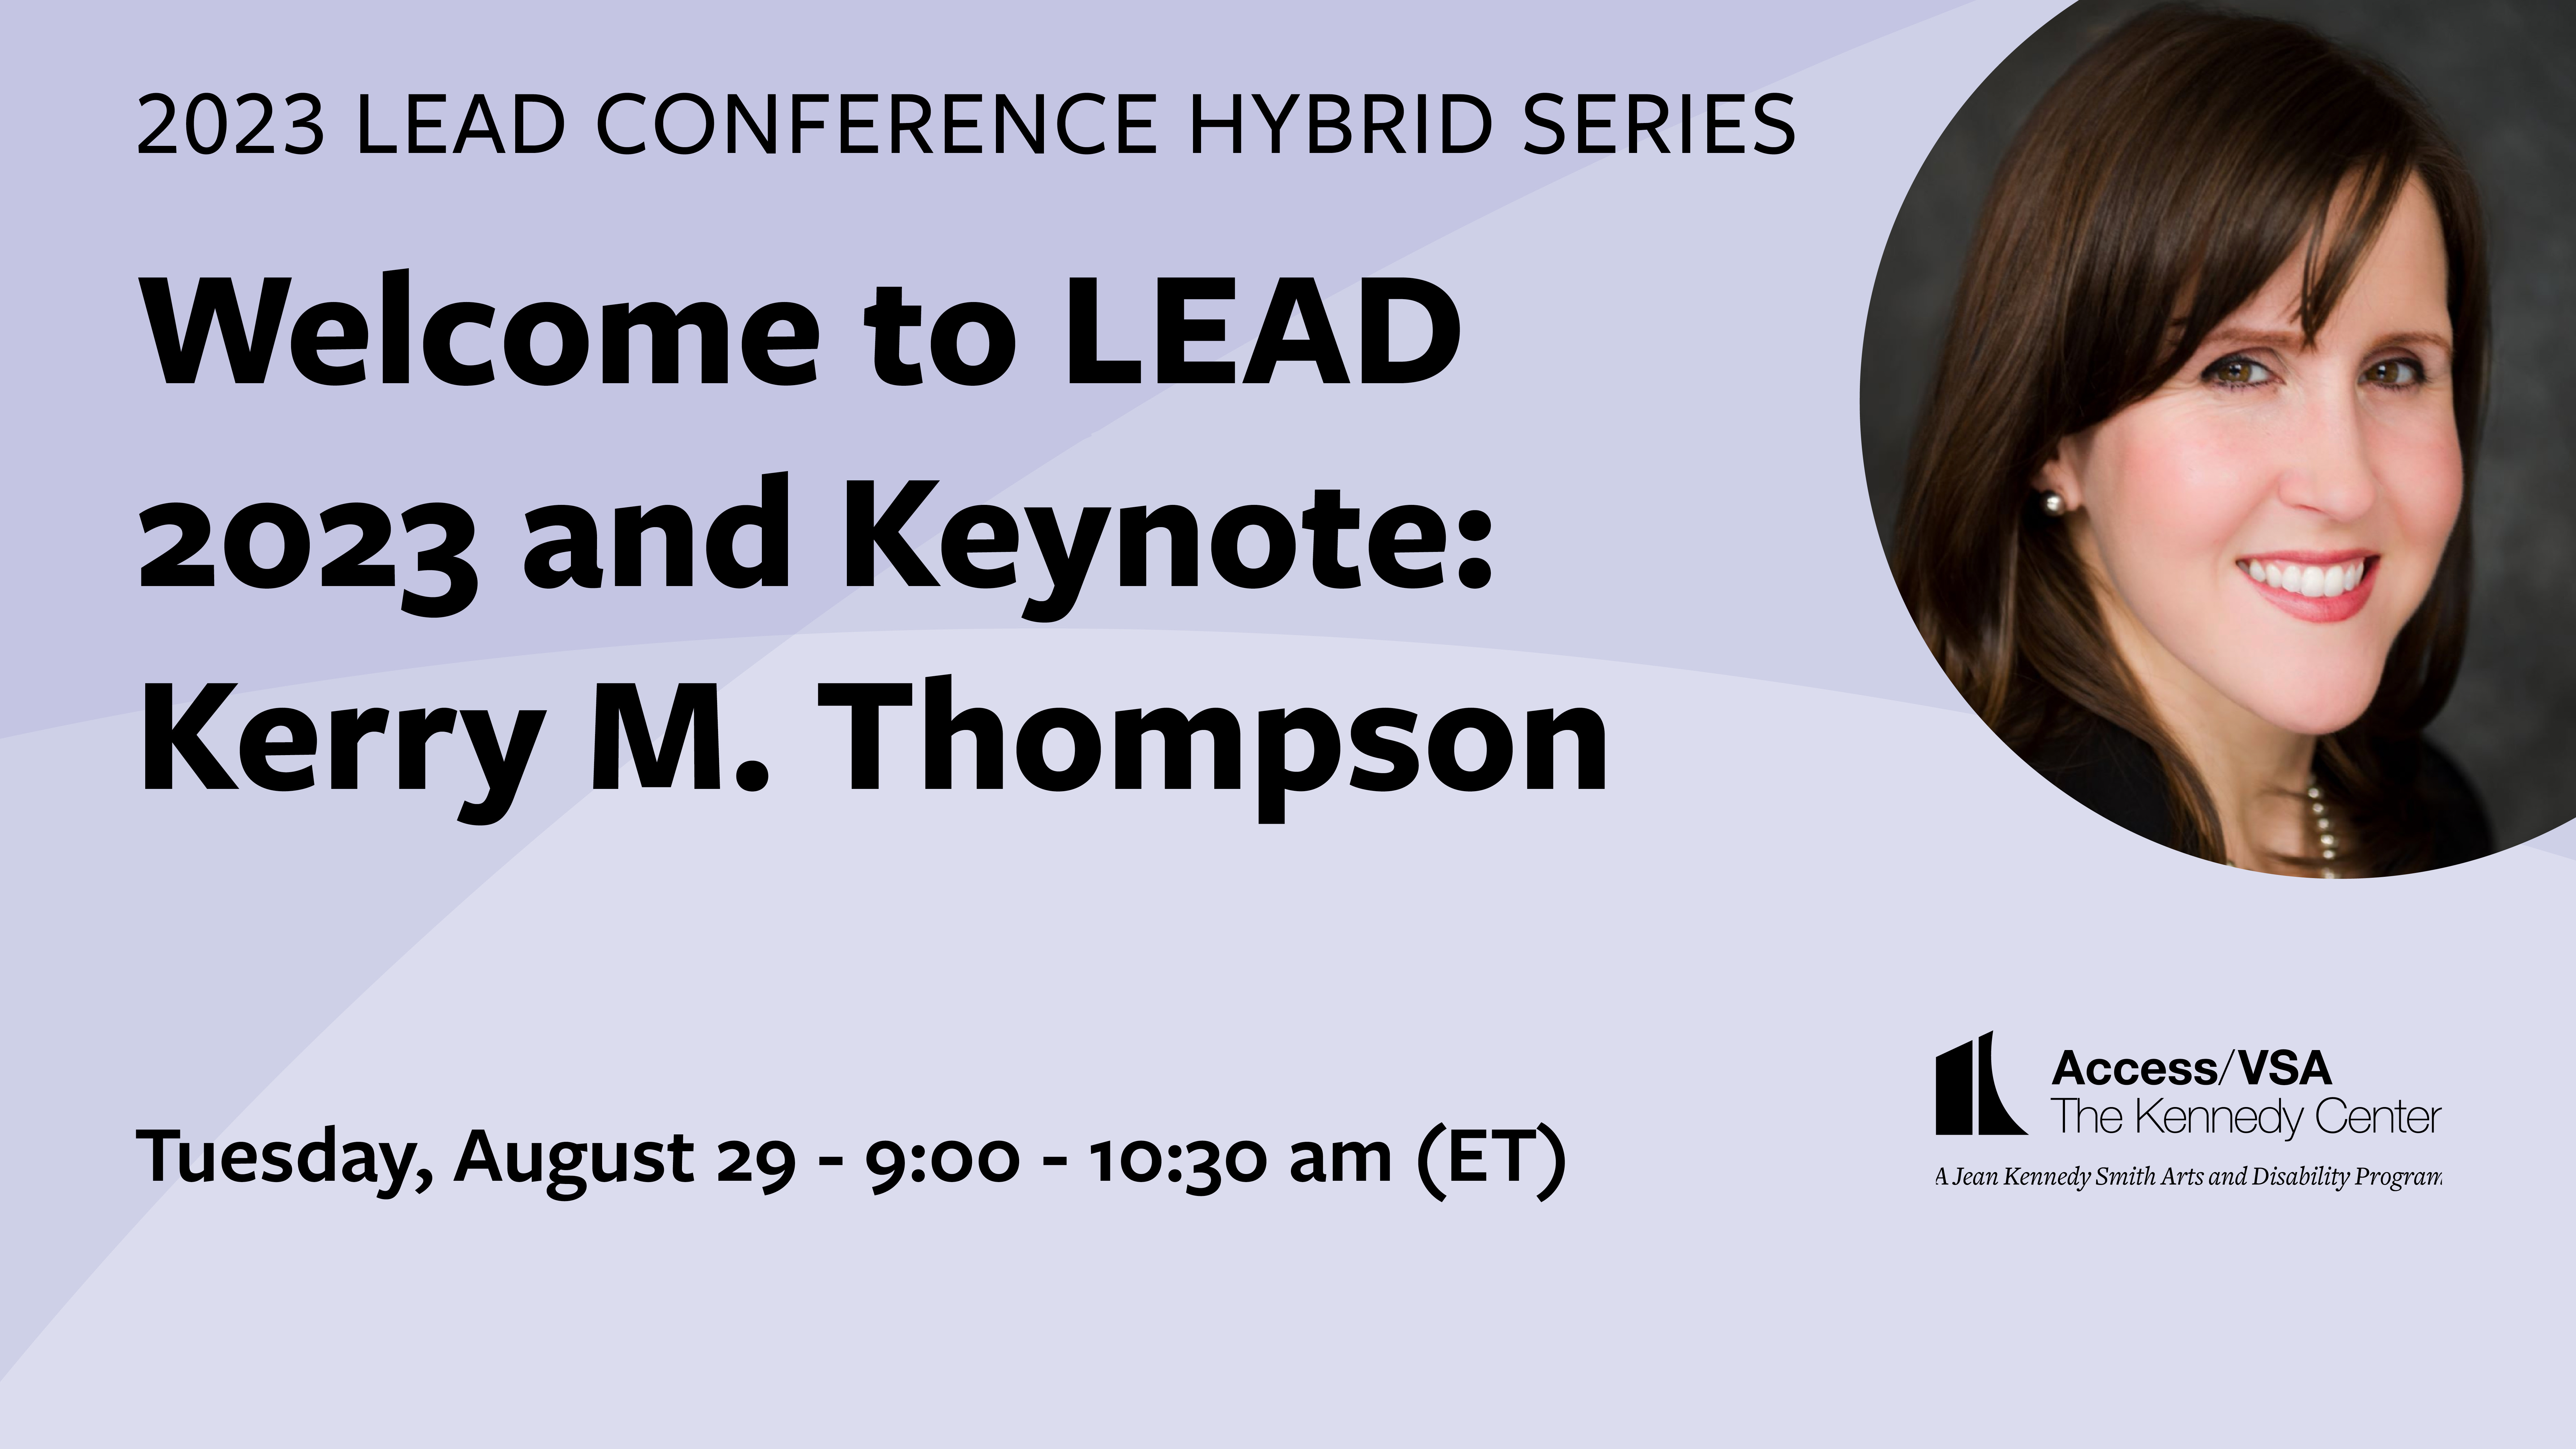 Welcome to LEAD 2023 & Keynote with Kerry M. Thompson 